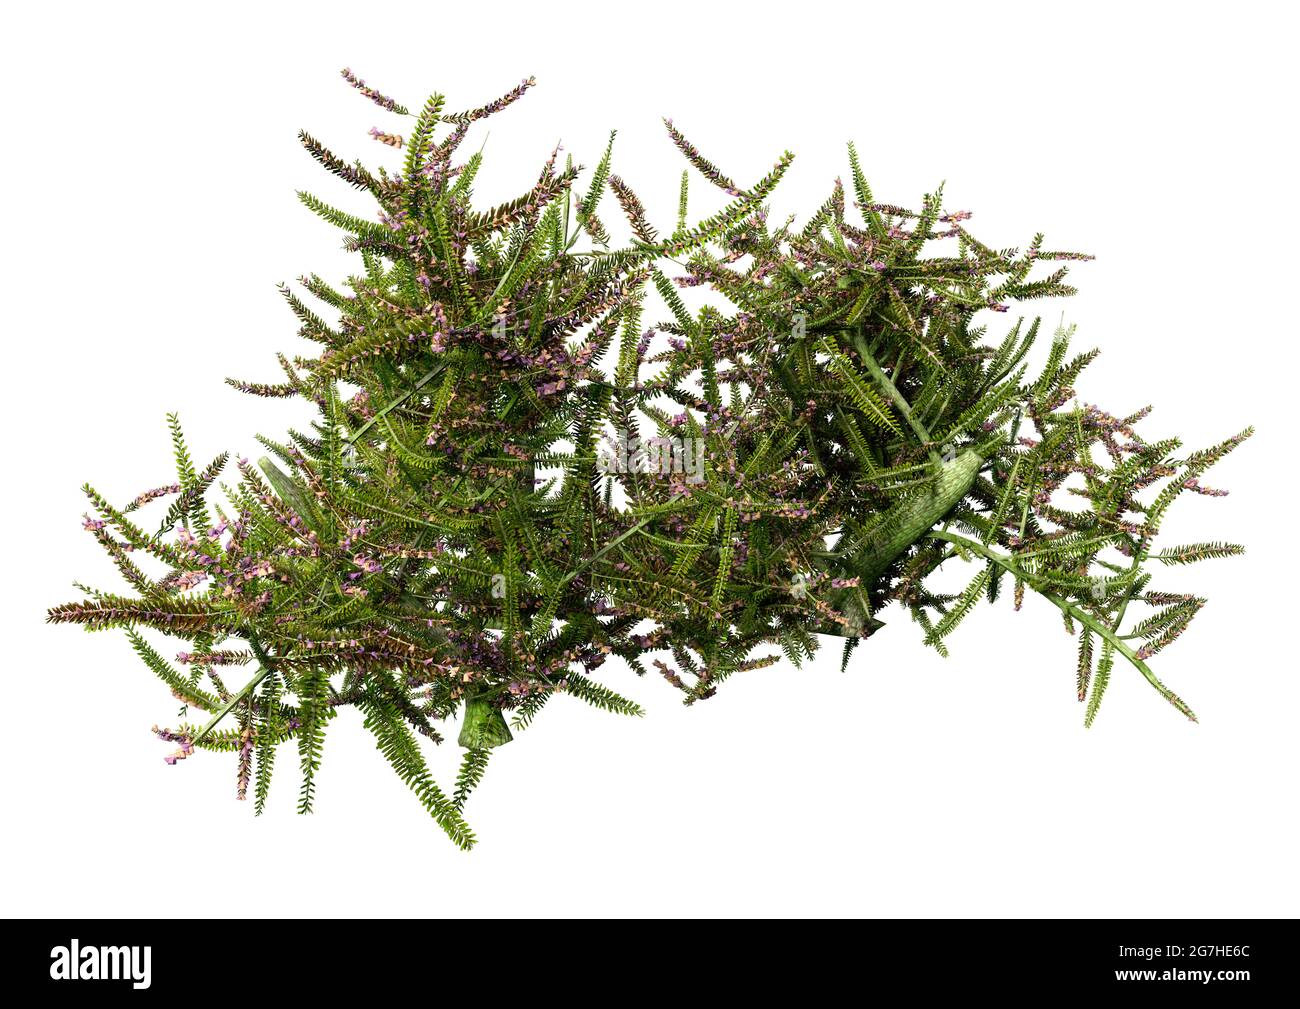 3D rendering of a blooming common heather plant or Calluna vulgaris isolated on white background Stock Photo